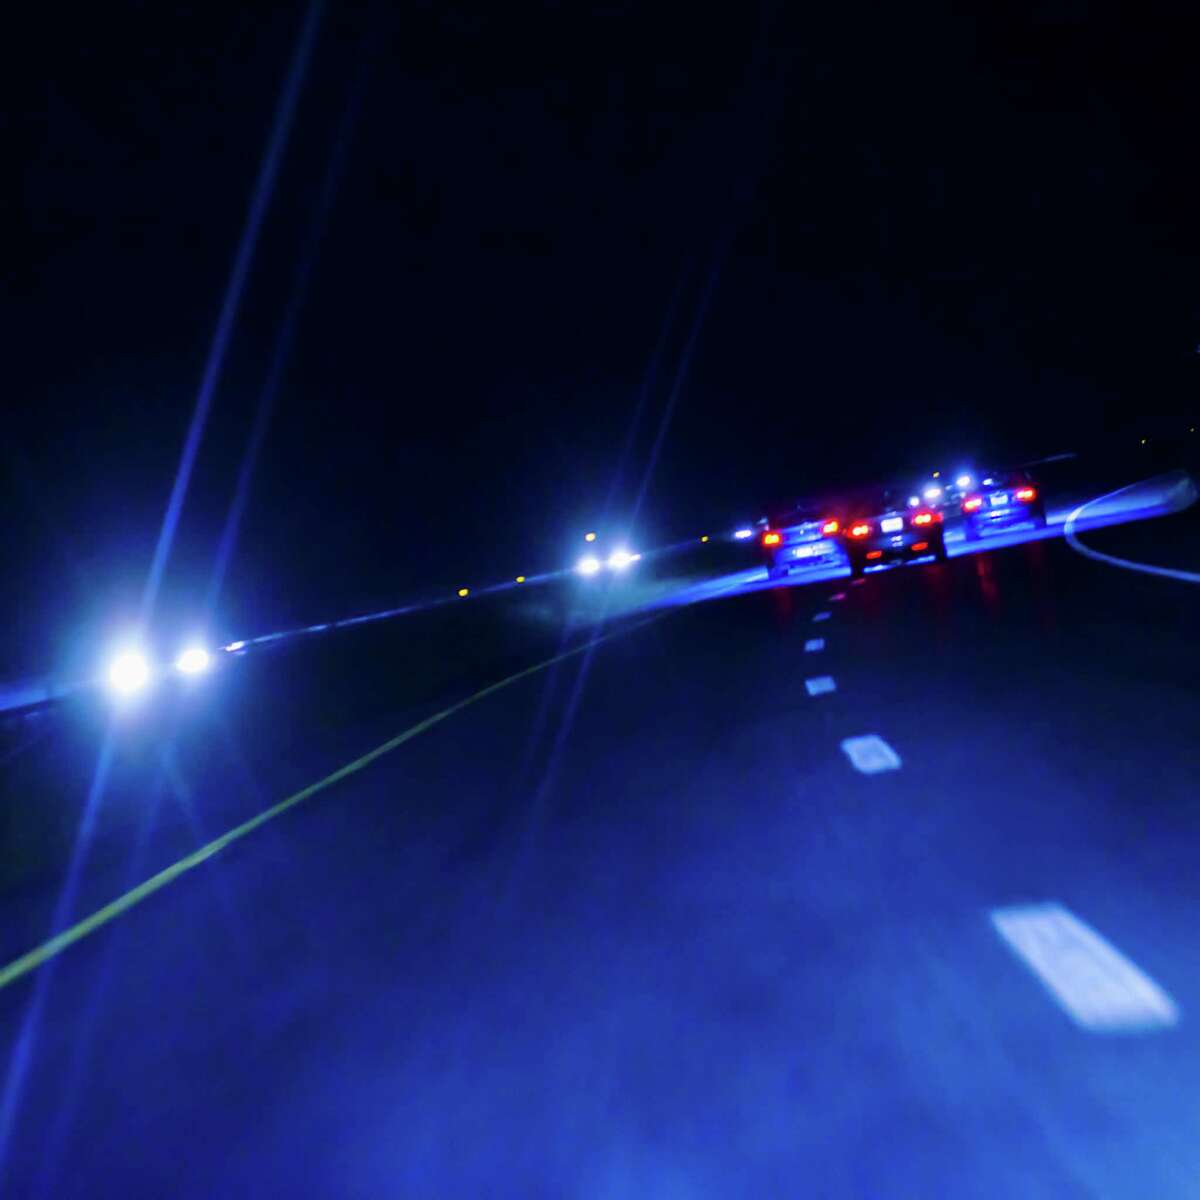 There are 12 signs that police look for when spotting a possible drunken driver. Here's what they look for:1. Weaving across lane lines When officers see a car cutting past lines that divide lanes, it could mean that the driver is under the influence of drugs or alcohol.